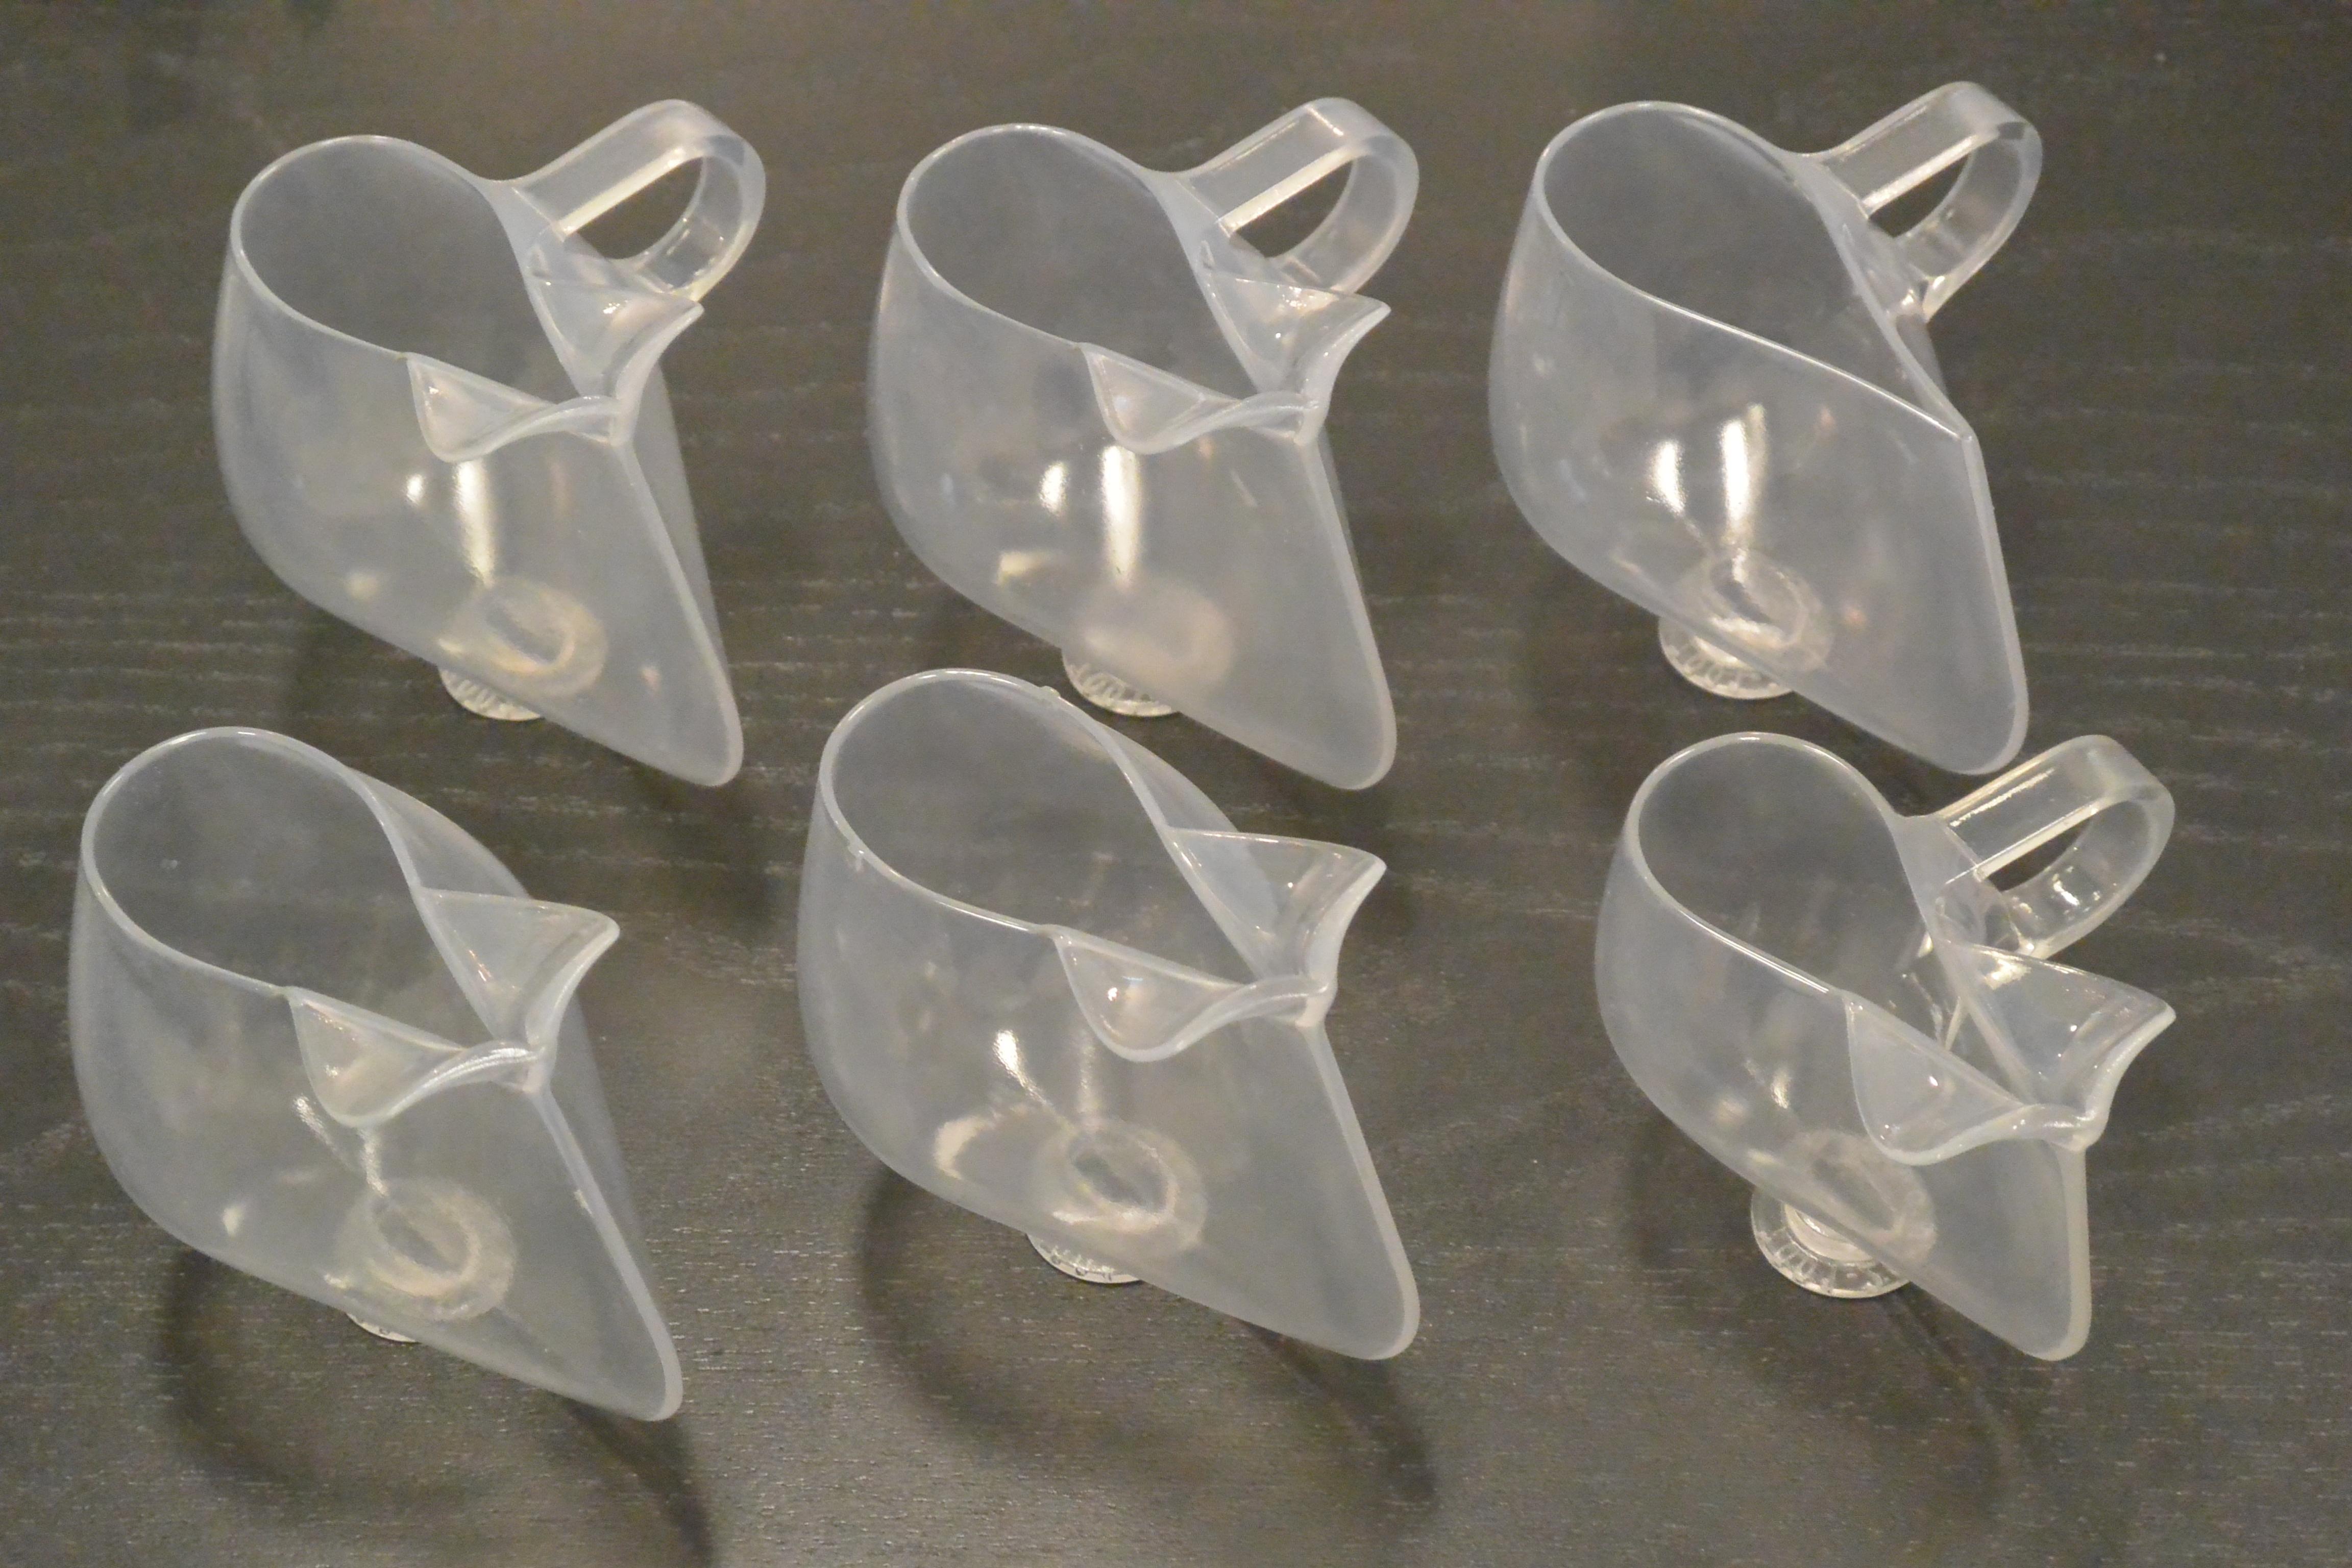 Six Space Cups as delivered to NASA January, 2015 for the Capillary Effects of Drinking in the Microgravity Environment (Capillary Beverage) investigation.